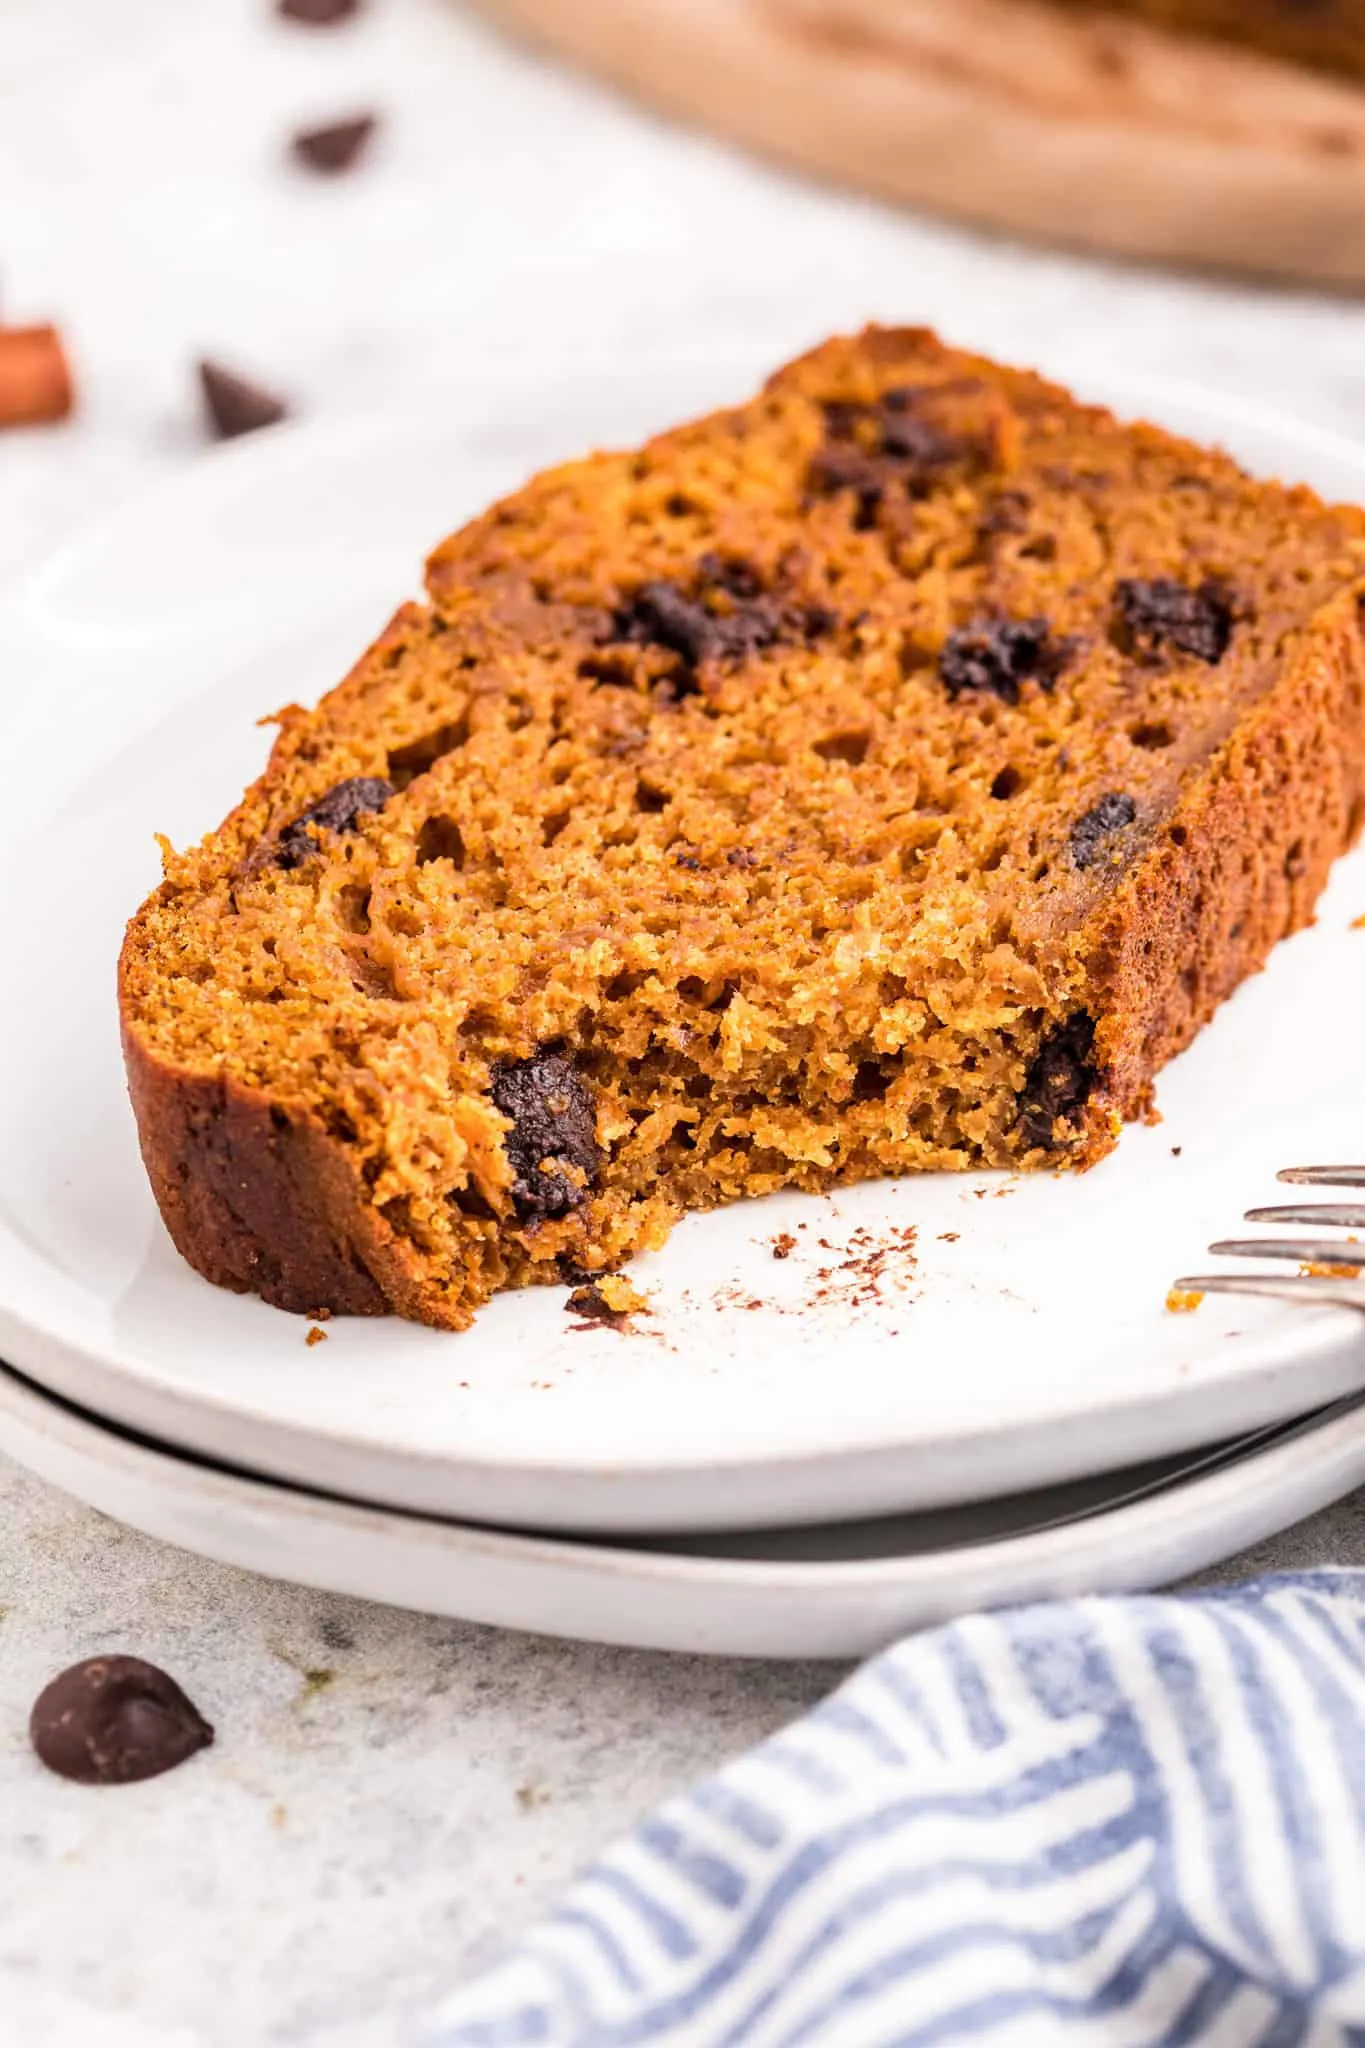 Pumpkin Chocolate Chip Bread is a delicious fall treat made with pumpkin puree and loaded with chocolate chips.